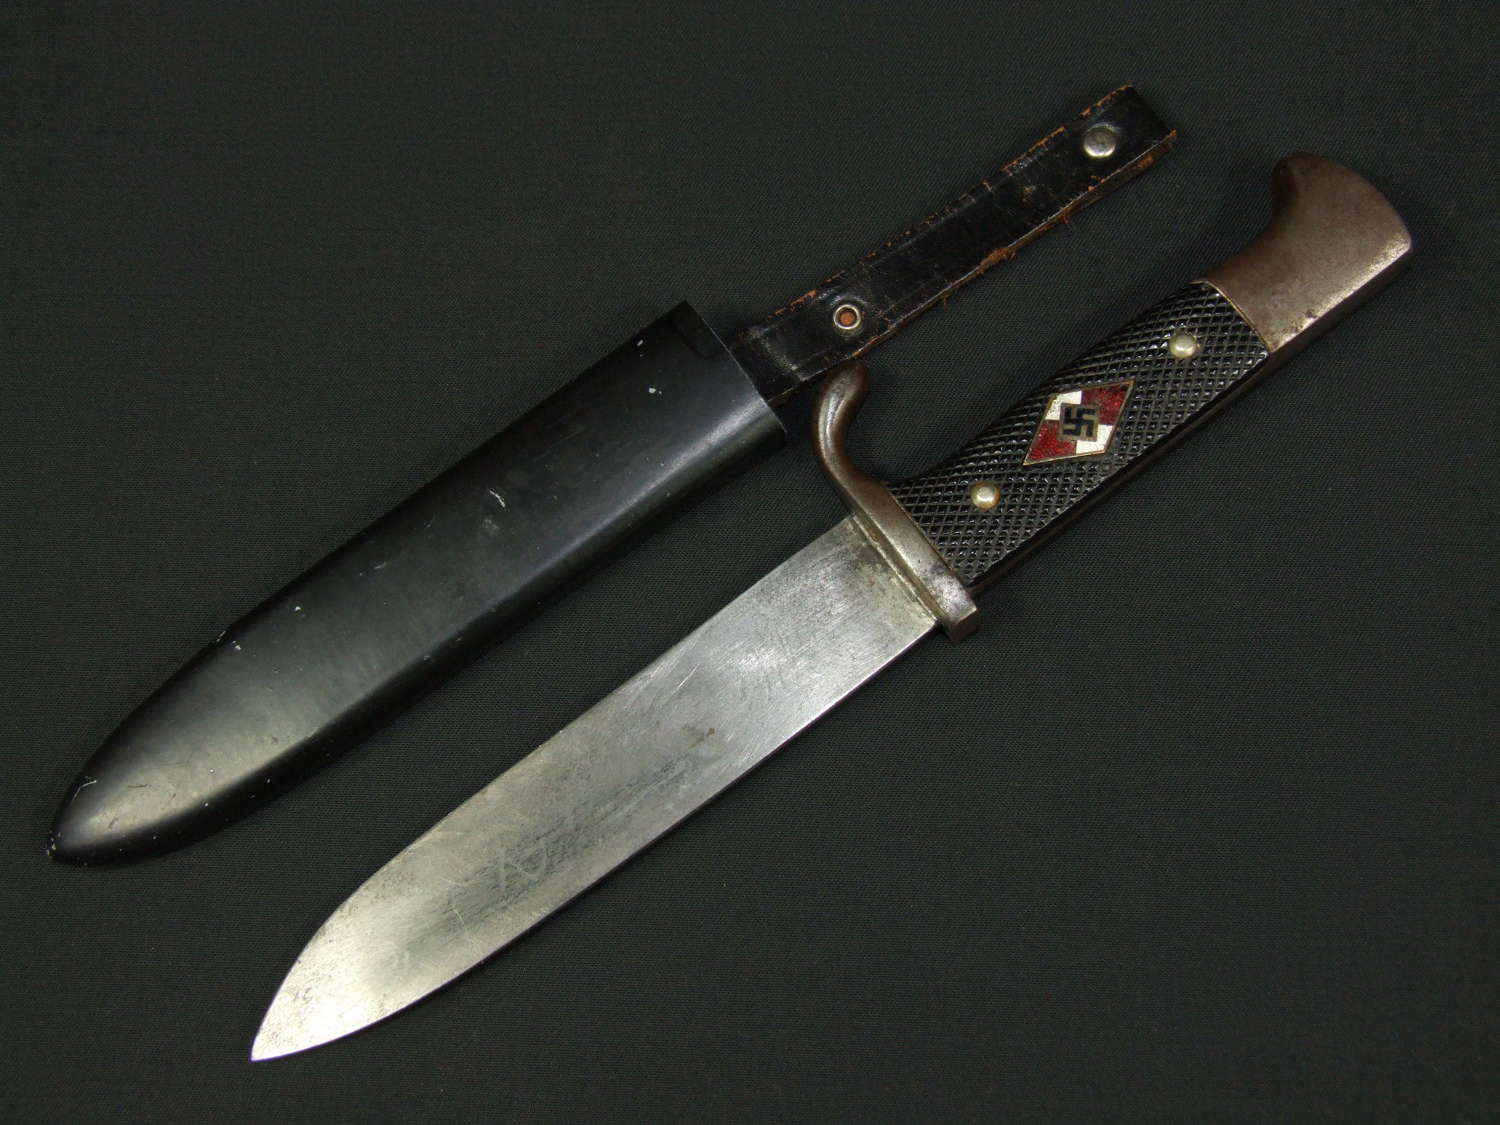 Early Hitler Youth Knife by Hammesfahr